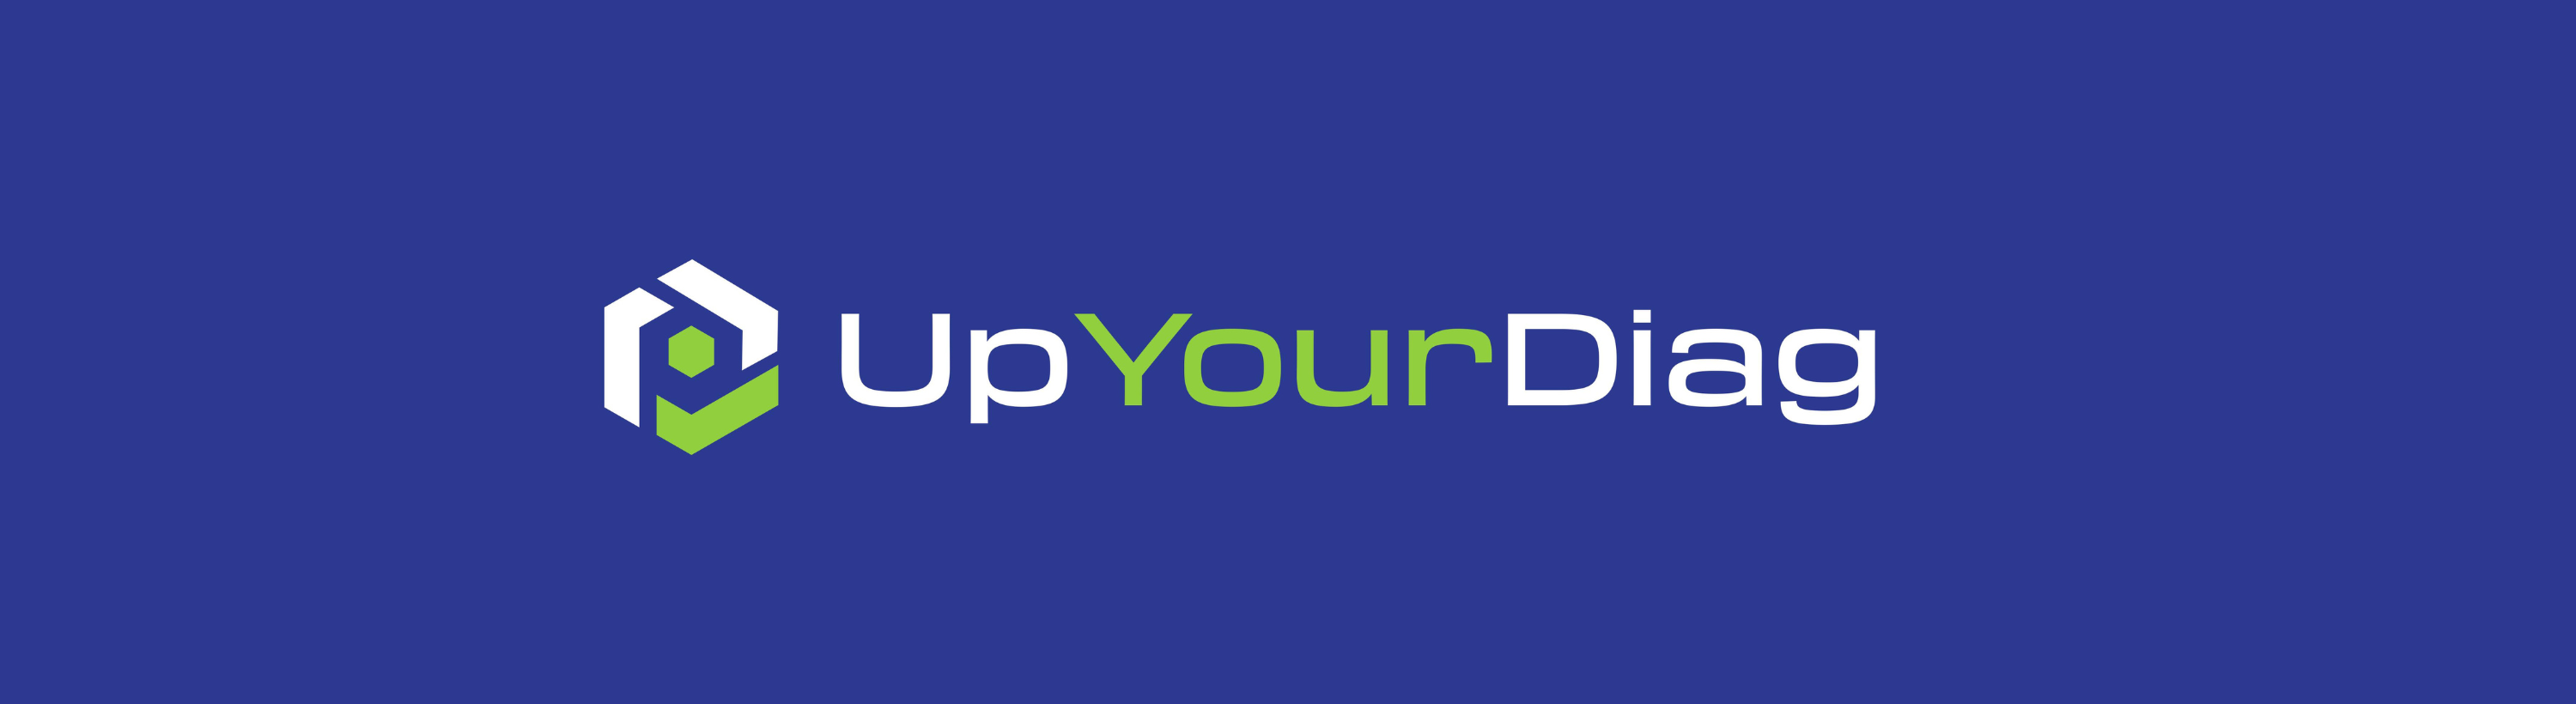 Up Your Diag